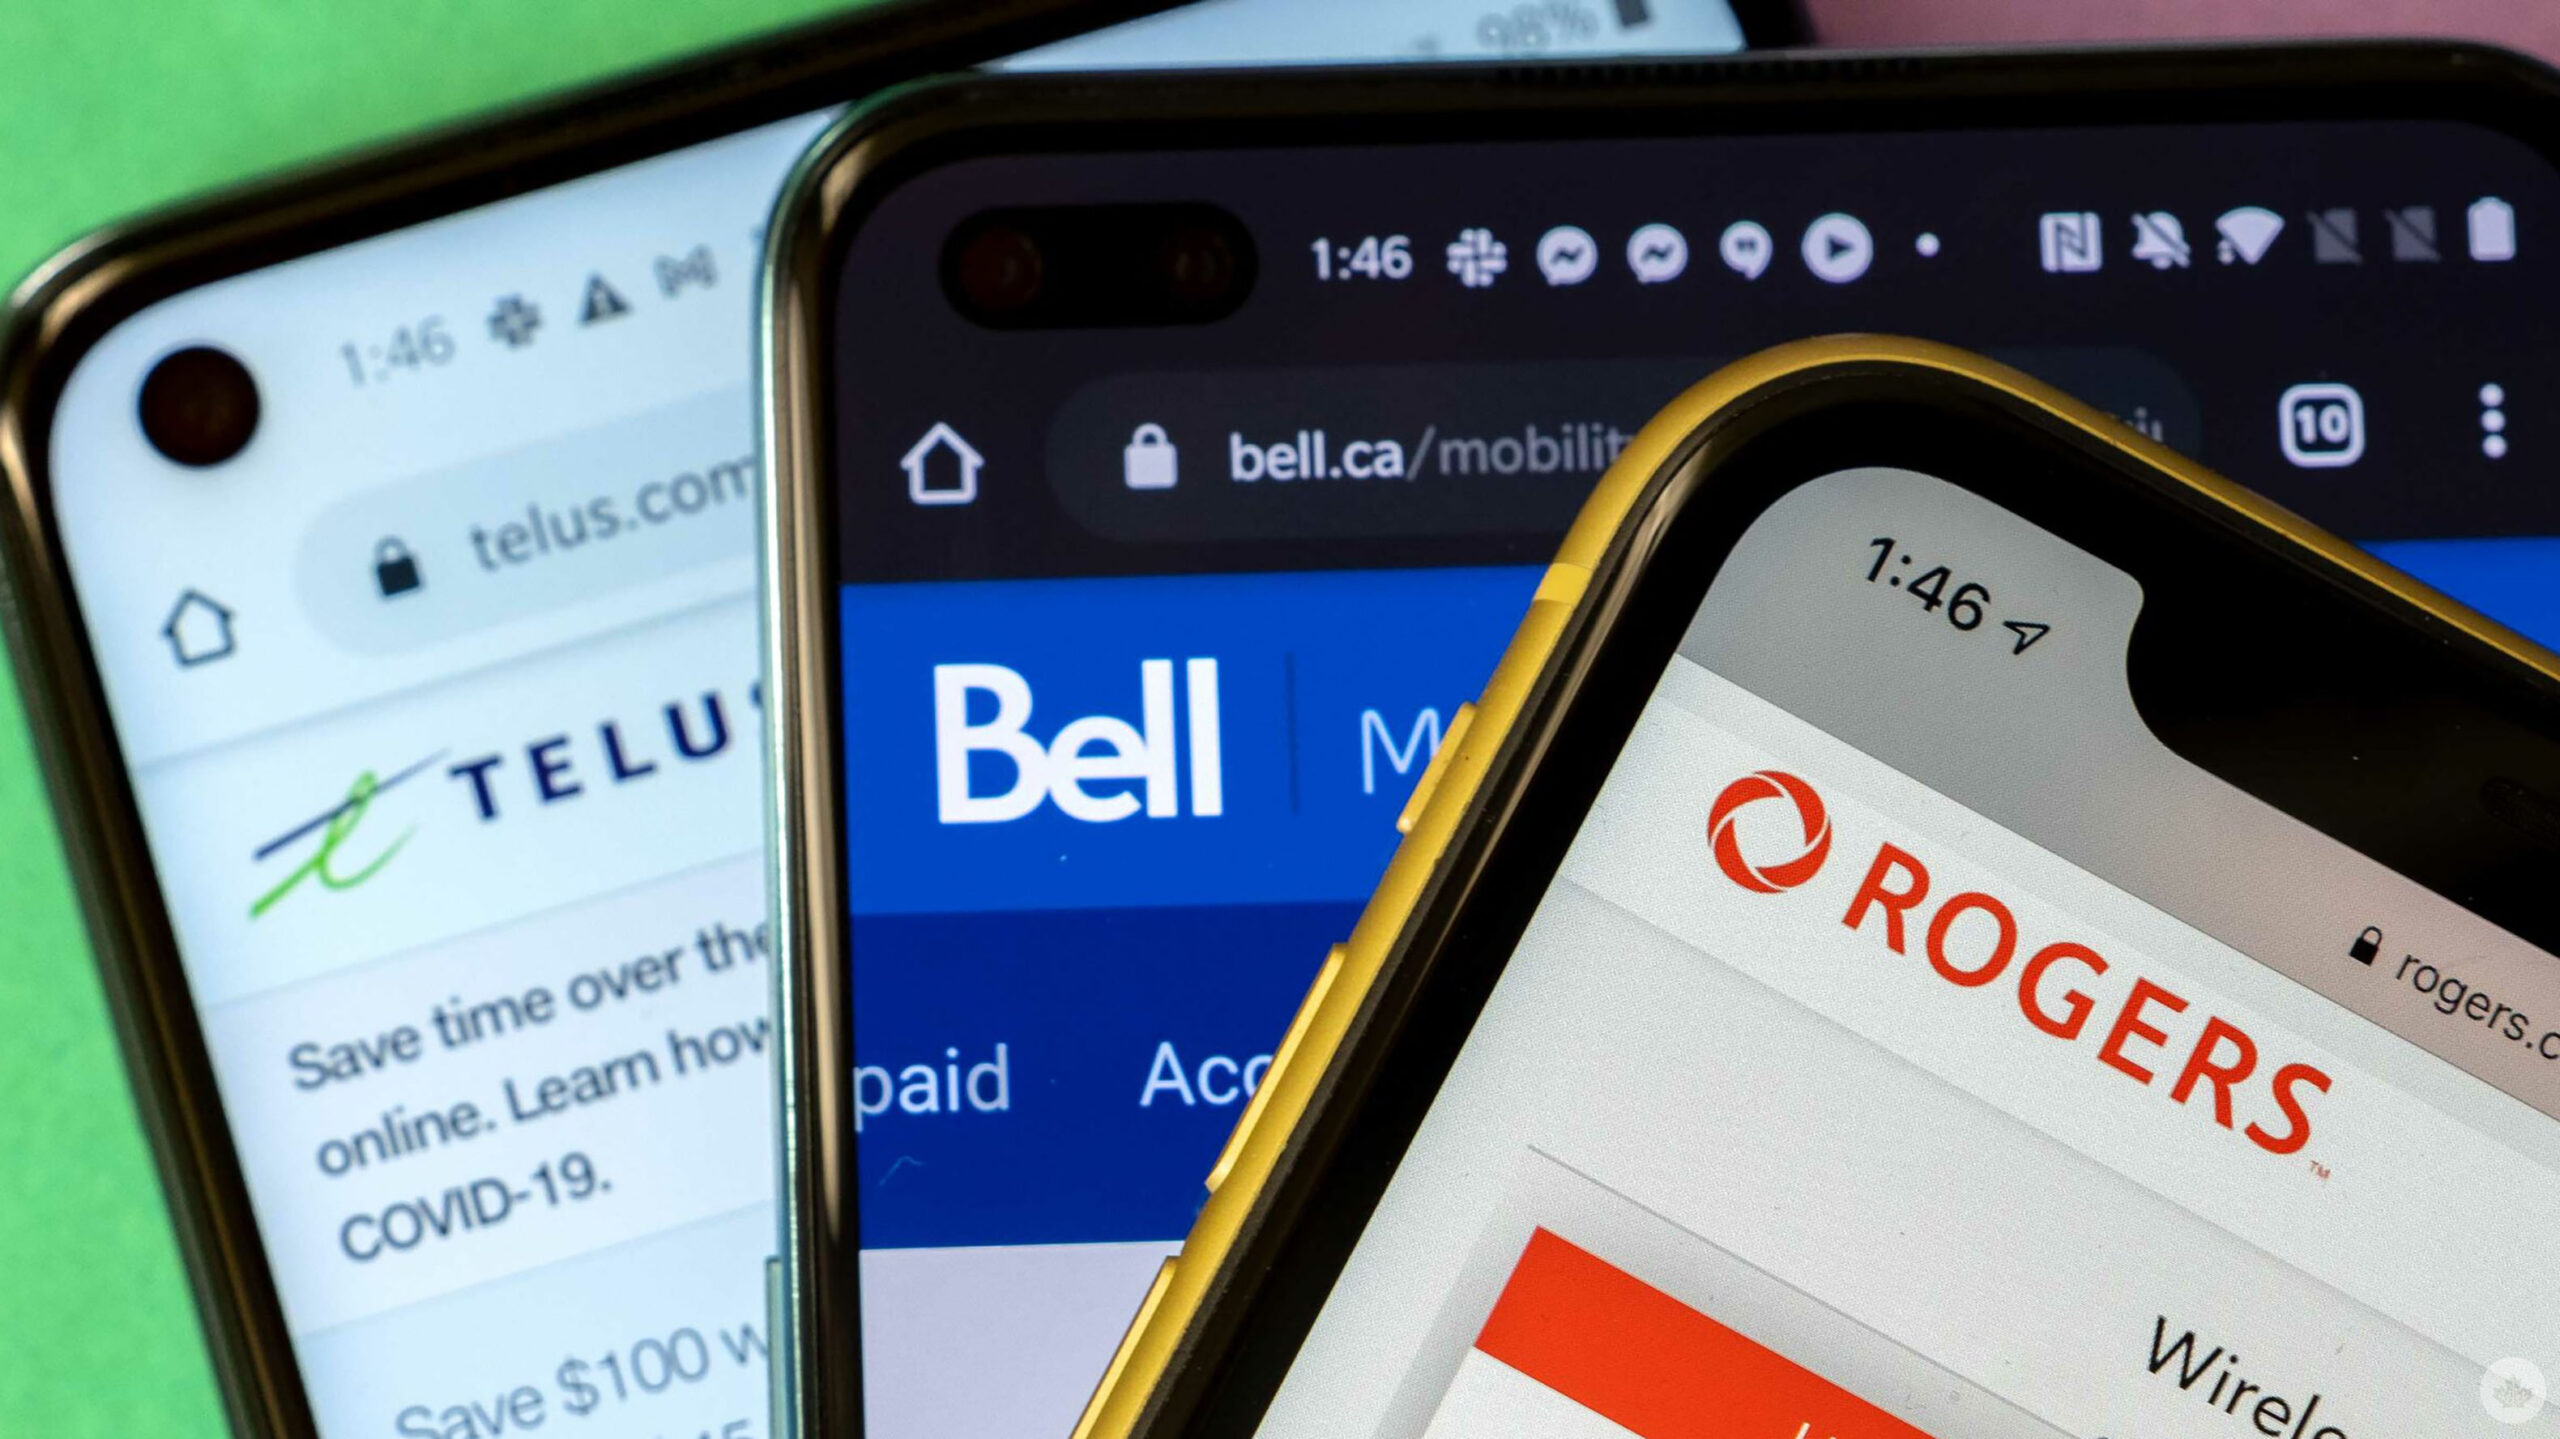 Rogers, Bell, Telus plans start the year a little pricier than before thumbnail